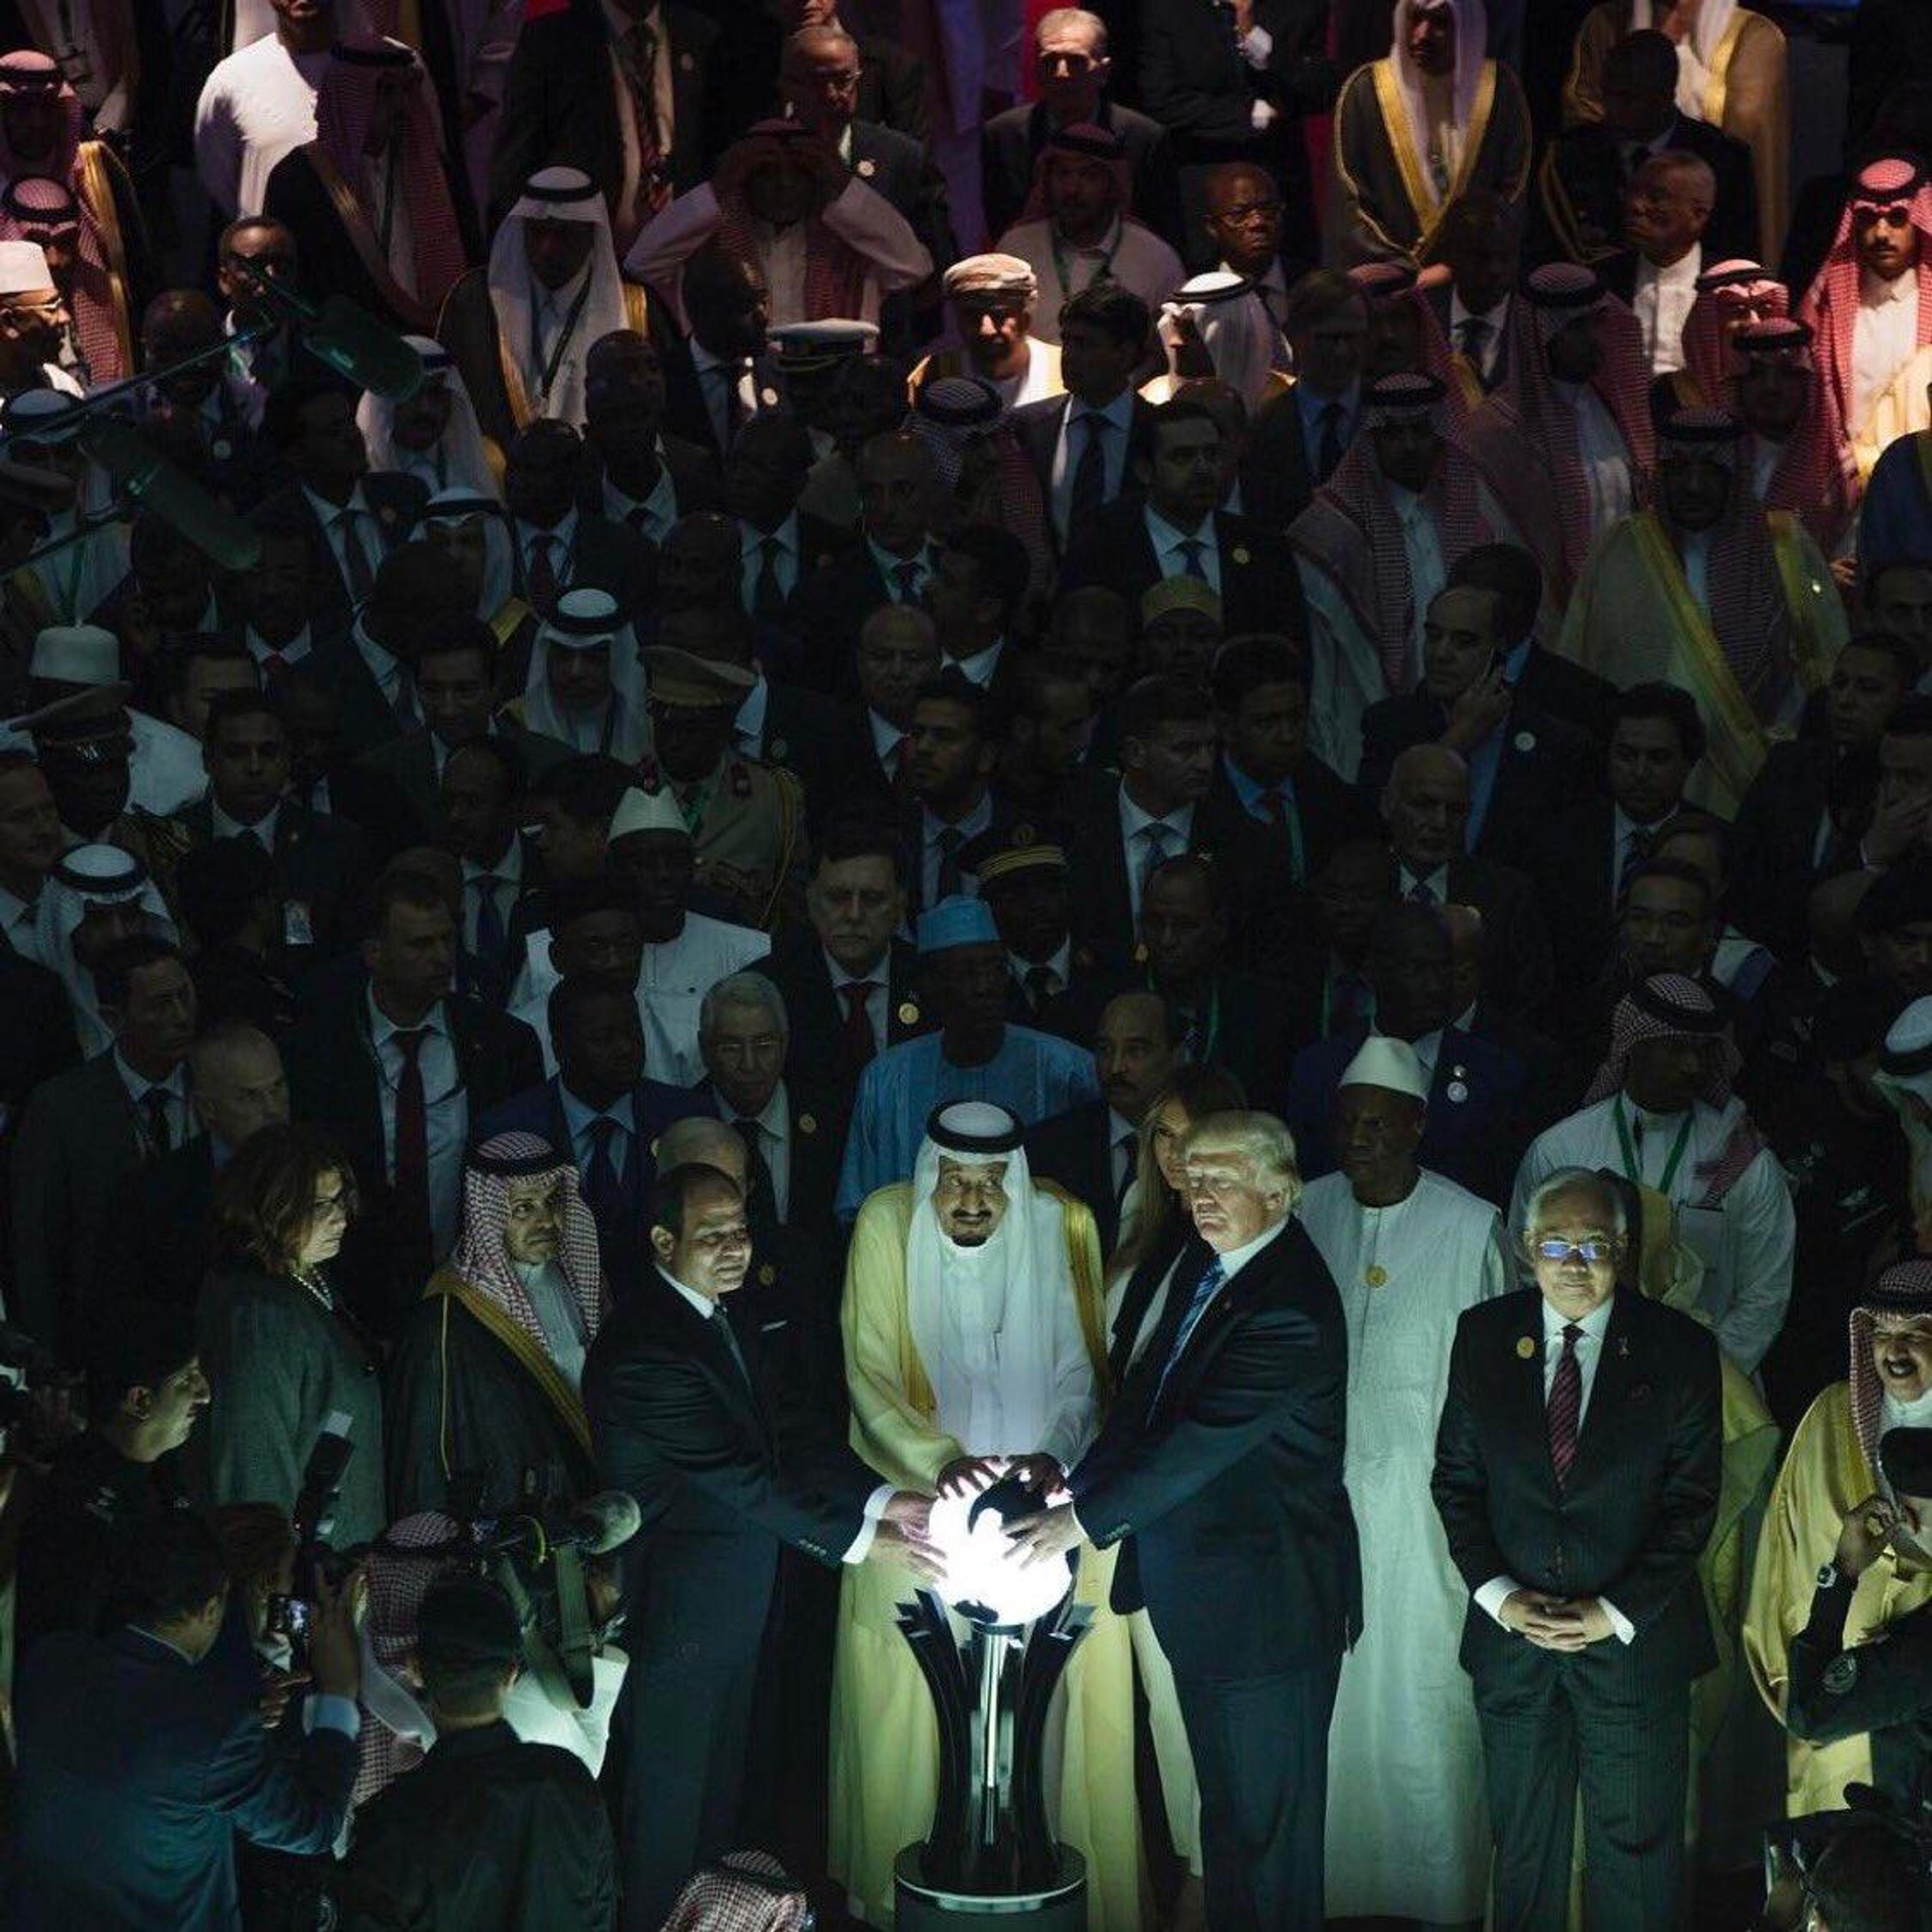 Mohammed Bin Salman and Donald Trump inaugurate The Global Center for Combatting Extremist Ideology in Riyadh, 2017